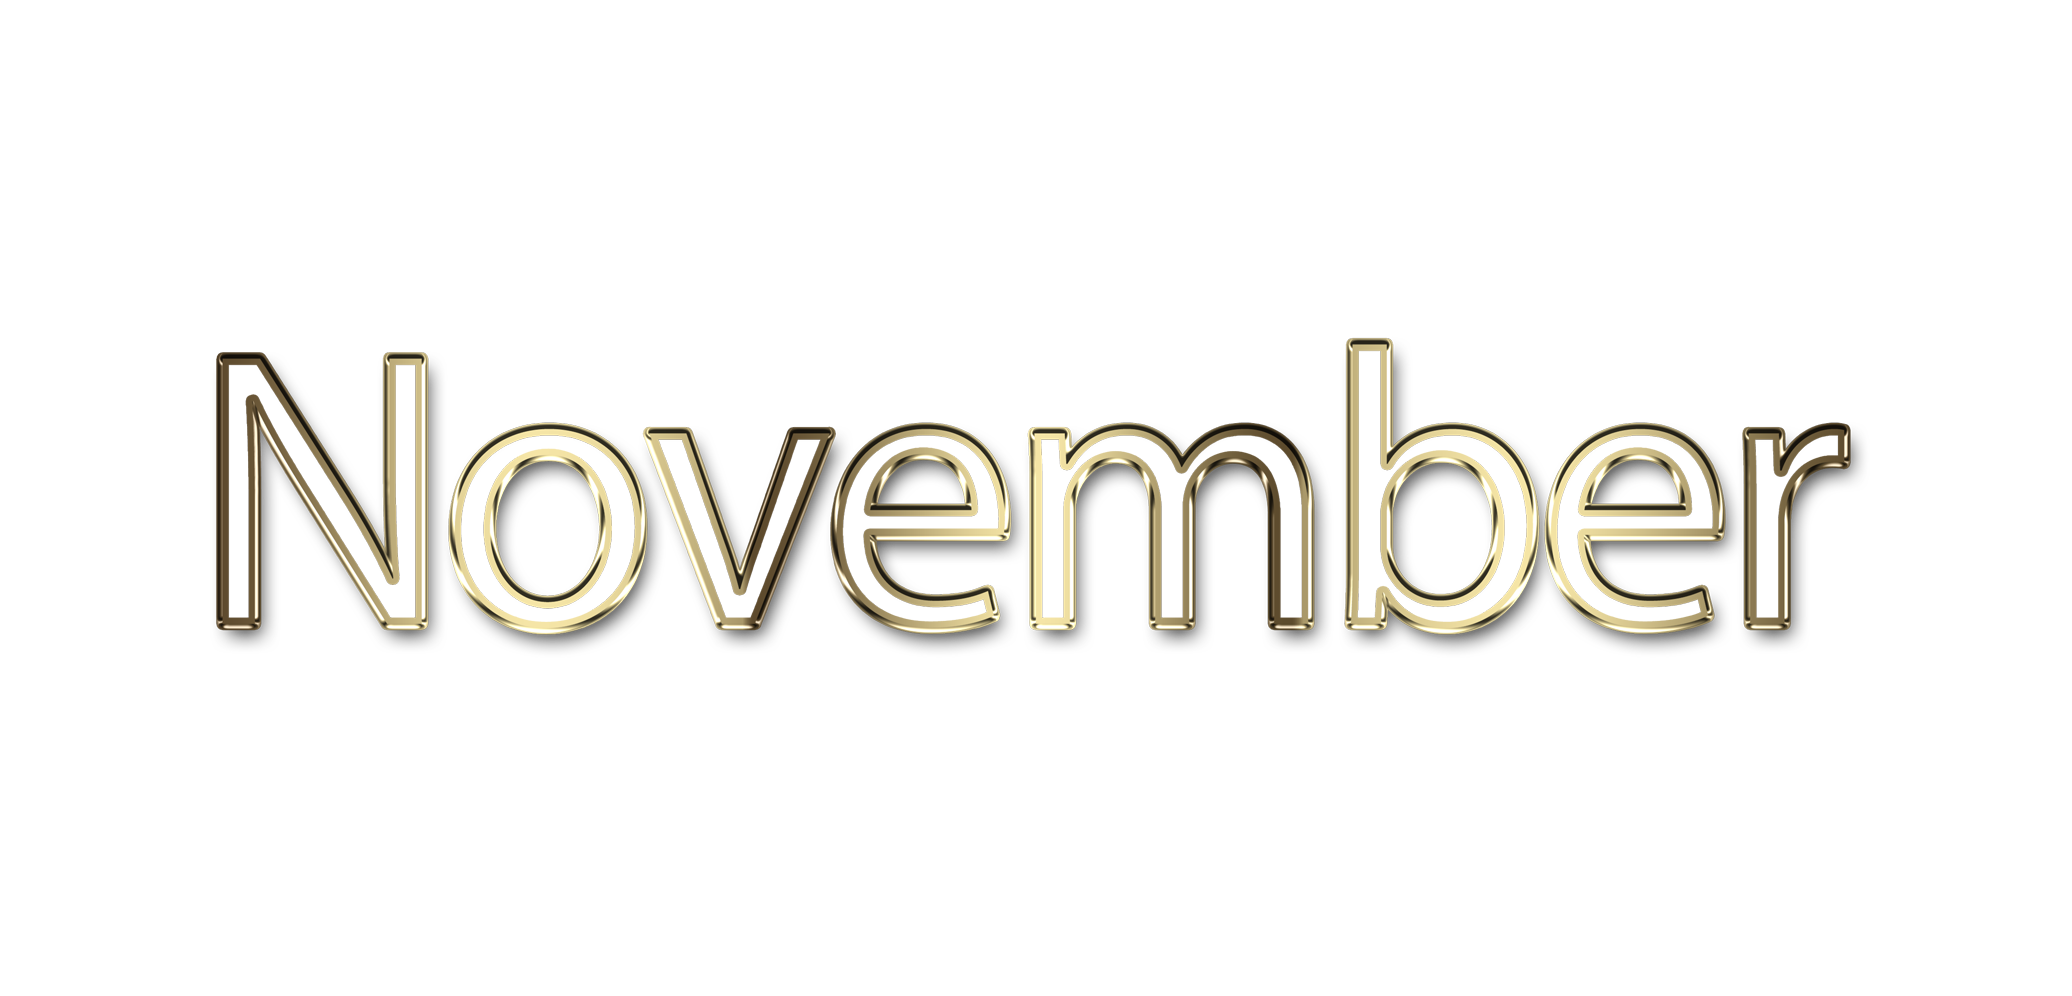 November png, word November png, November word png, November text png, November letters png, November word art typography PNG images, transparent png